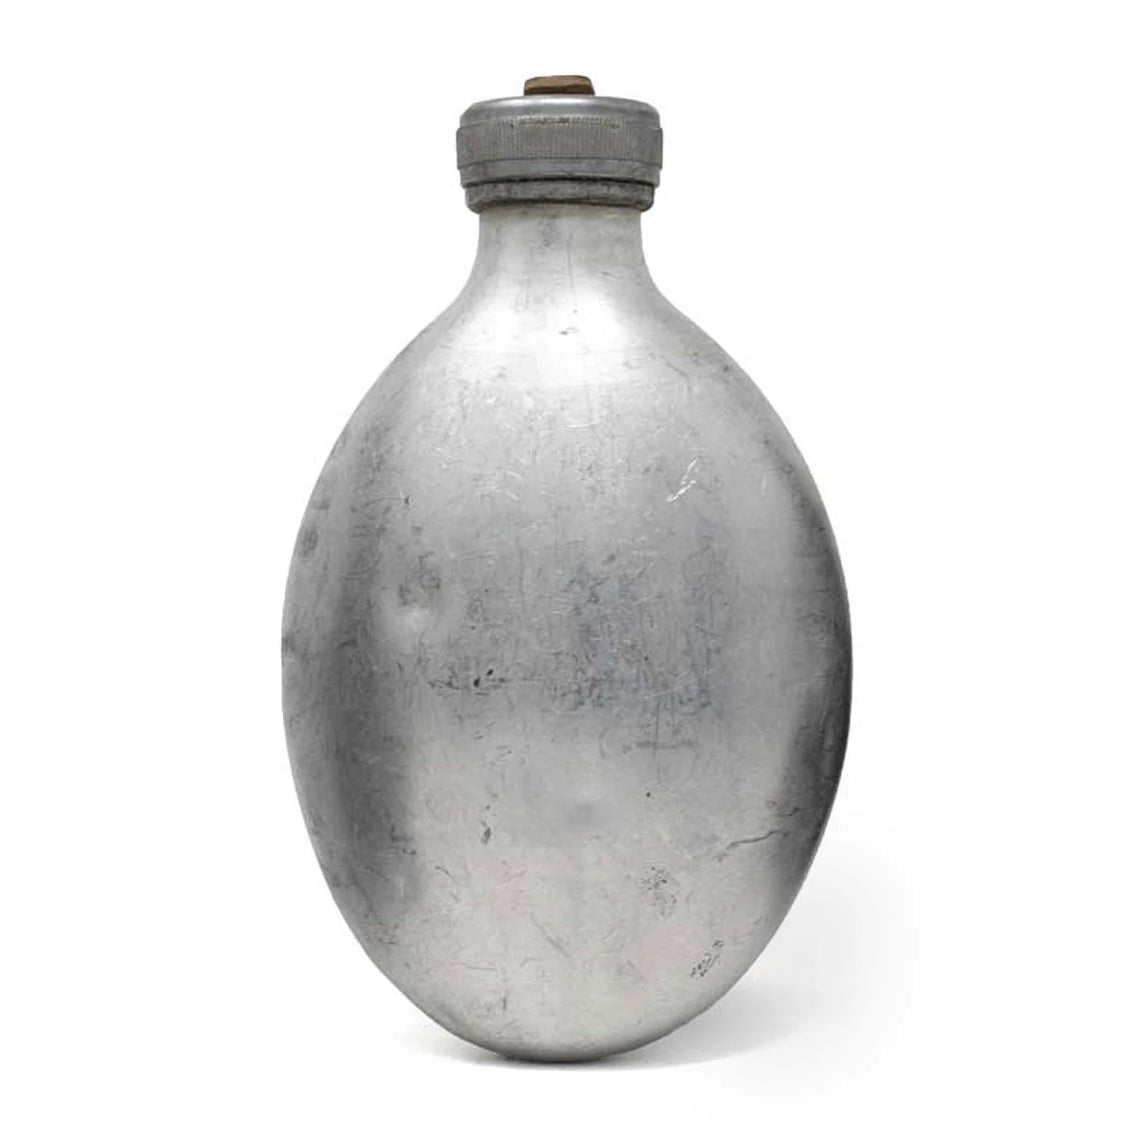 Swedish Army Issue Aluminum Canteen Without Cover